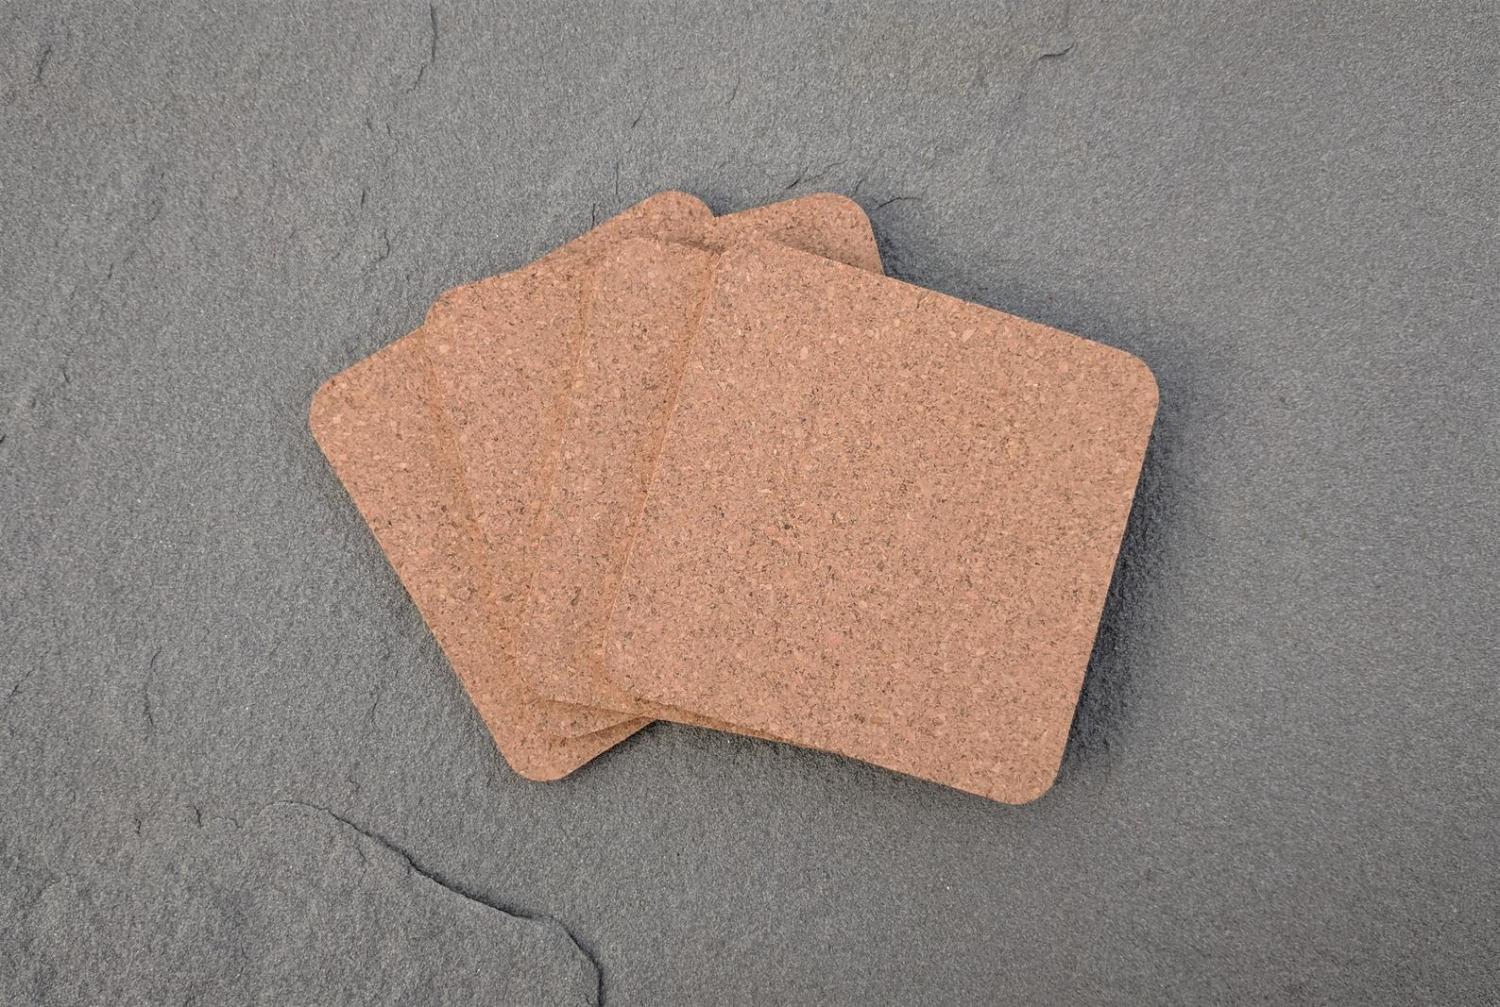 Square shaped cork coasters on a grey concrete surface